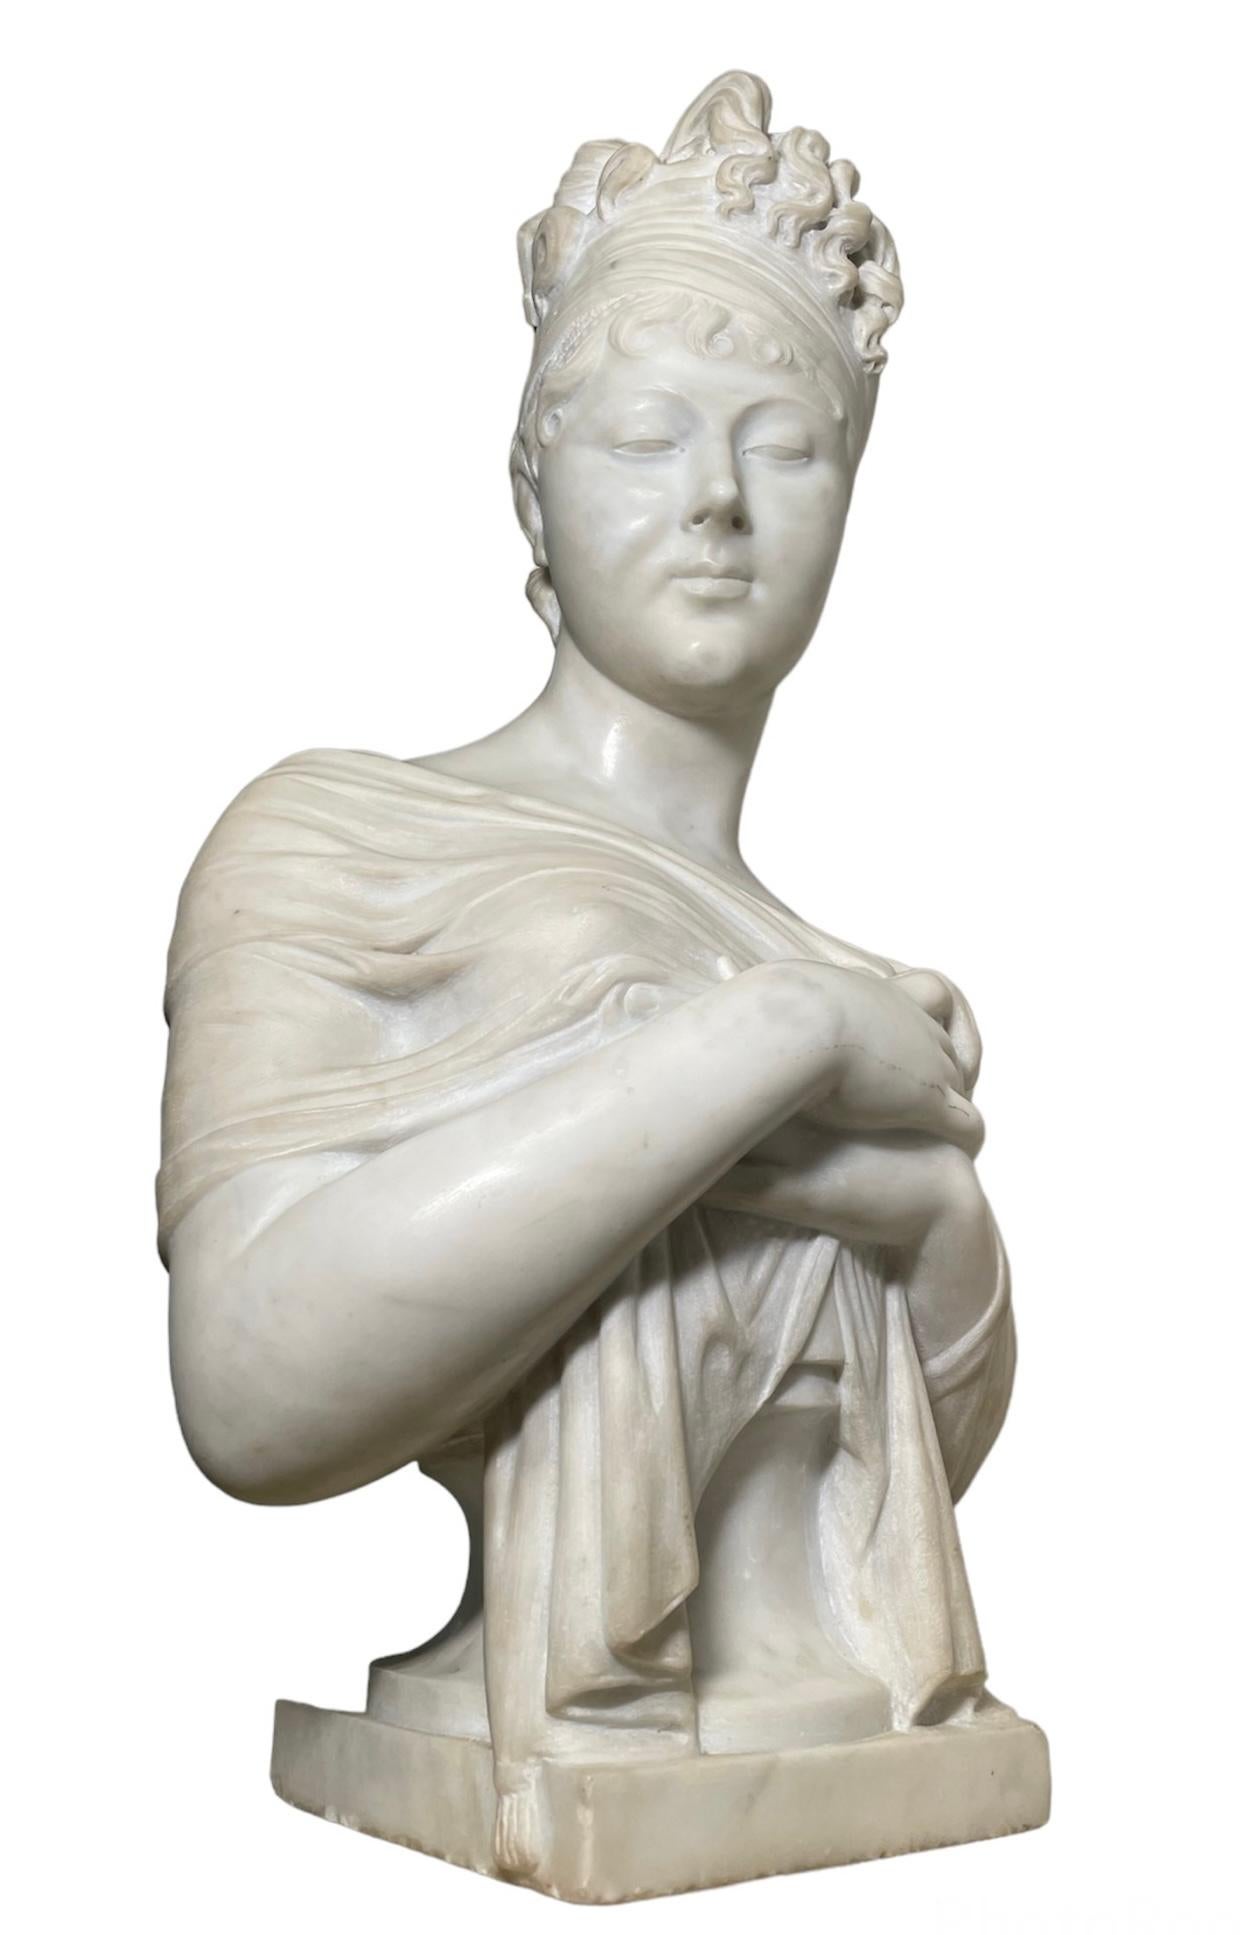 This is a white marble bust of Madame Recamier after Joseph Chinard sculpture. It depicts her head rotated to the right while she is covering her chest with a semi -transparent, probably silk shawl, but exposing one of her breast. She shows a shy